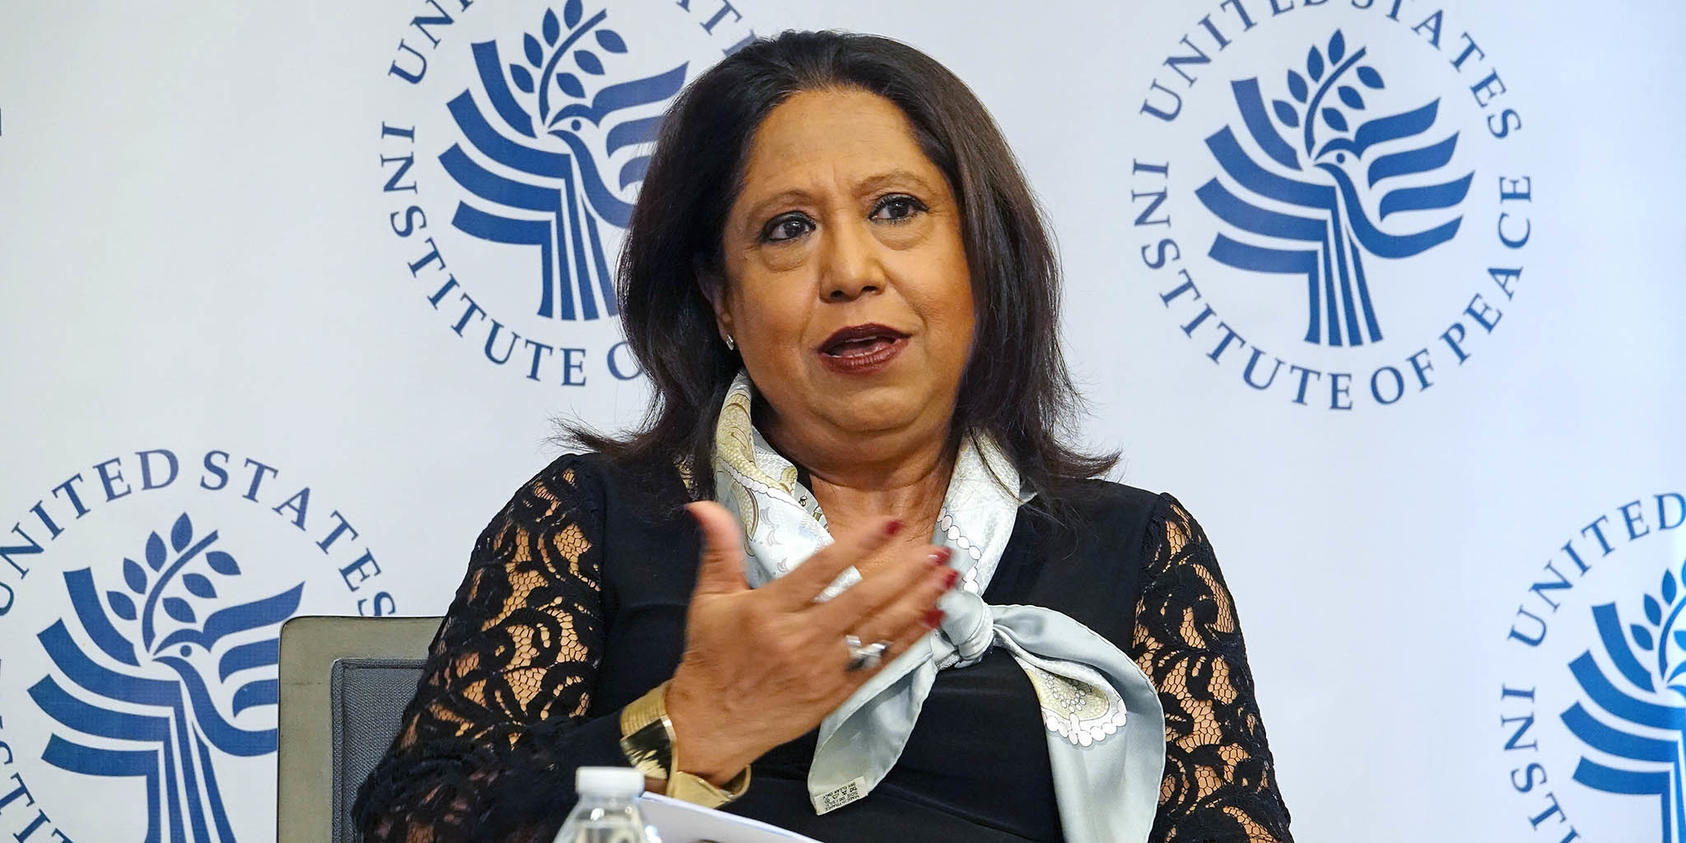 U.N. Special Representative on Sexual Violence in Conflict Pramila Patten told an audience at USIP that the international community must address sexual violence in Ukraine now or the problem will only worsen.